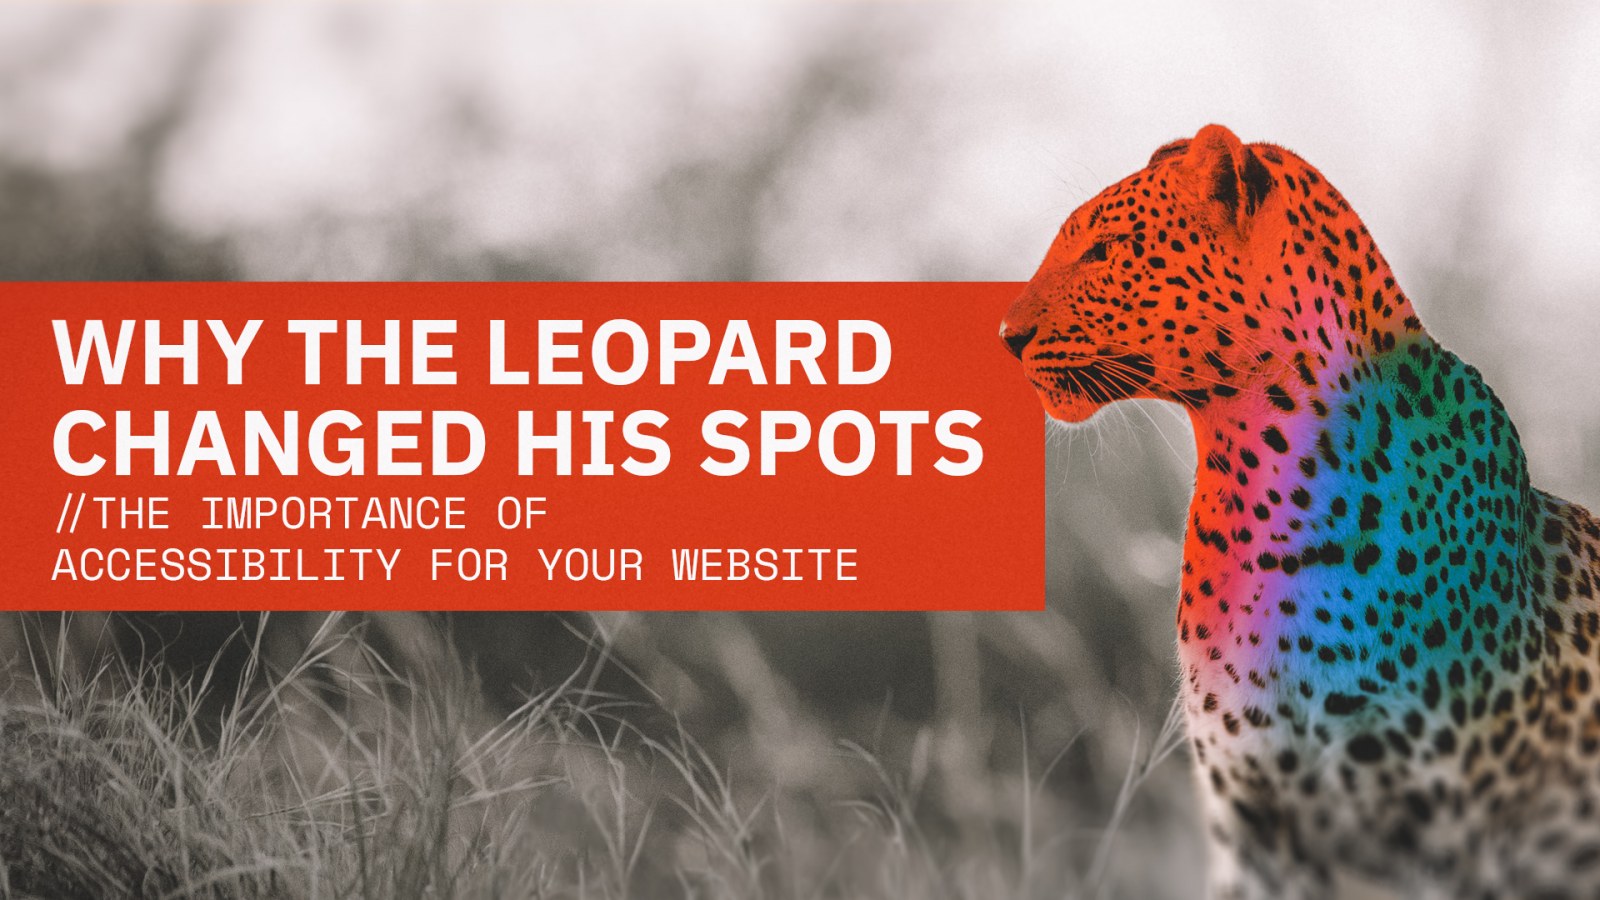 A Leopard sitting in tall grass with the text "Why The Leopard Changed his Spots" " //The Importance of Accessibility for Your Website"